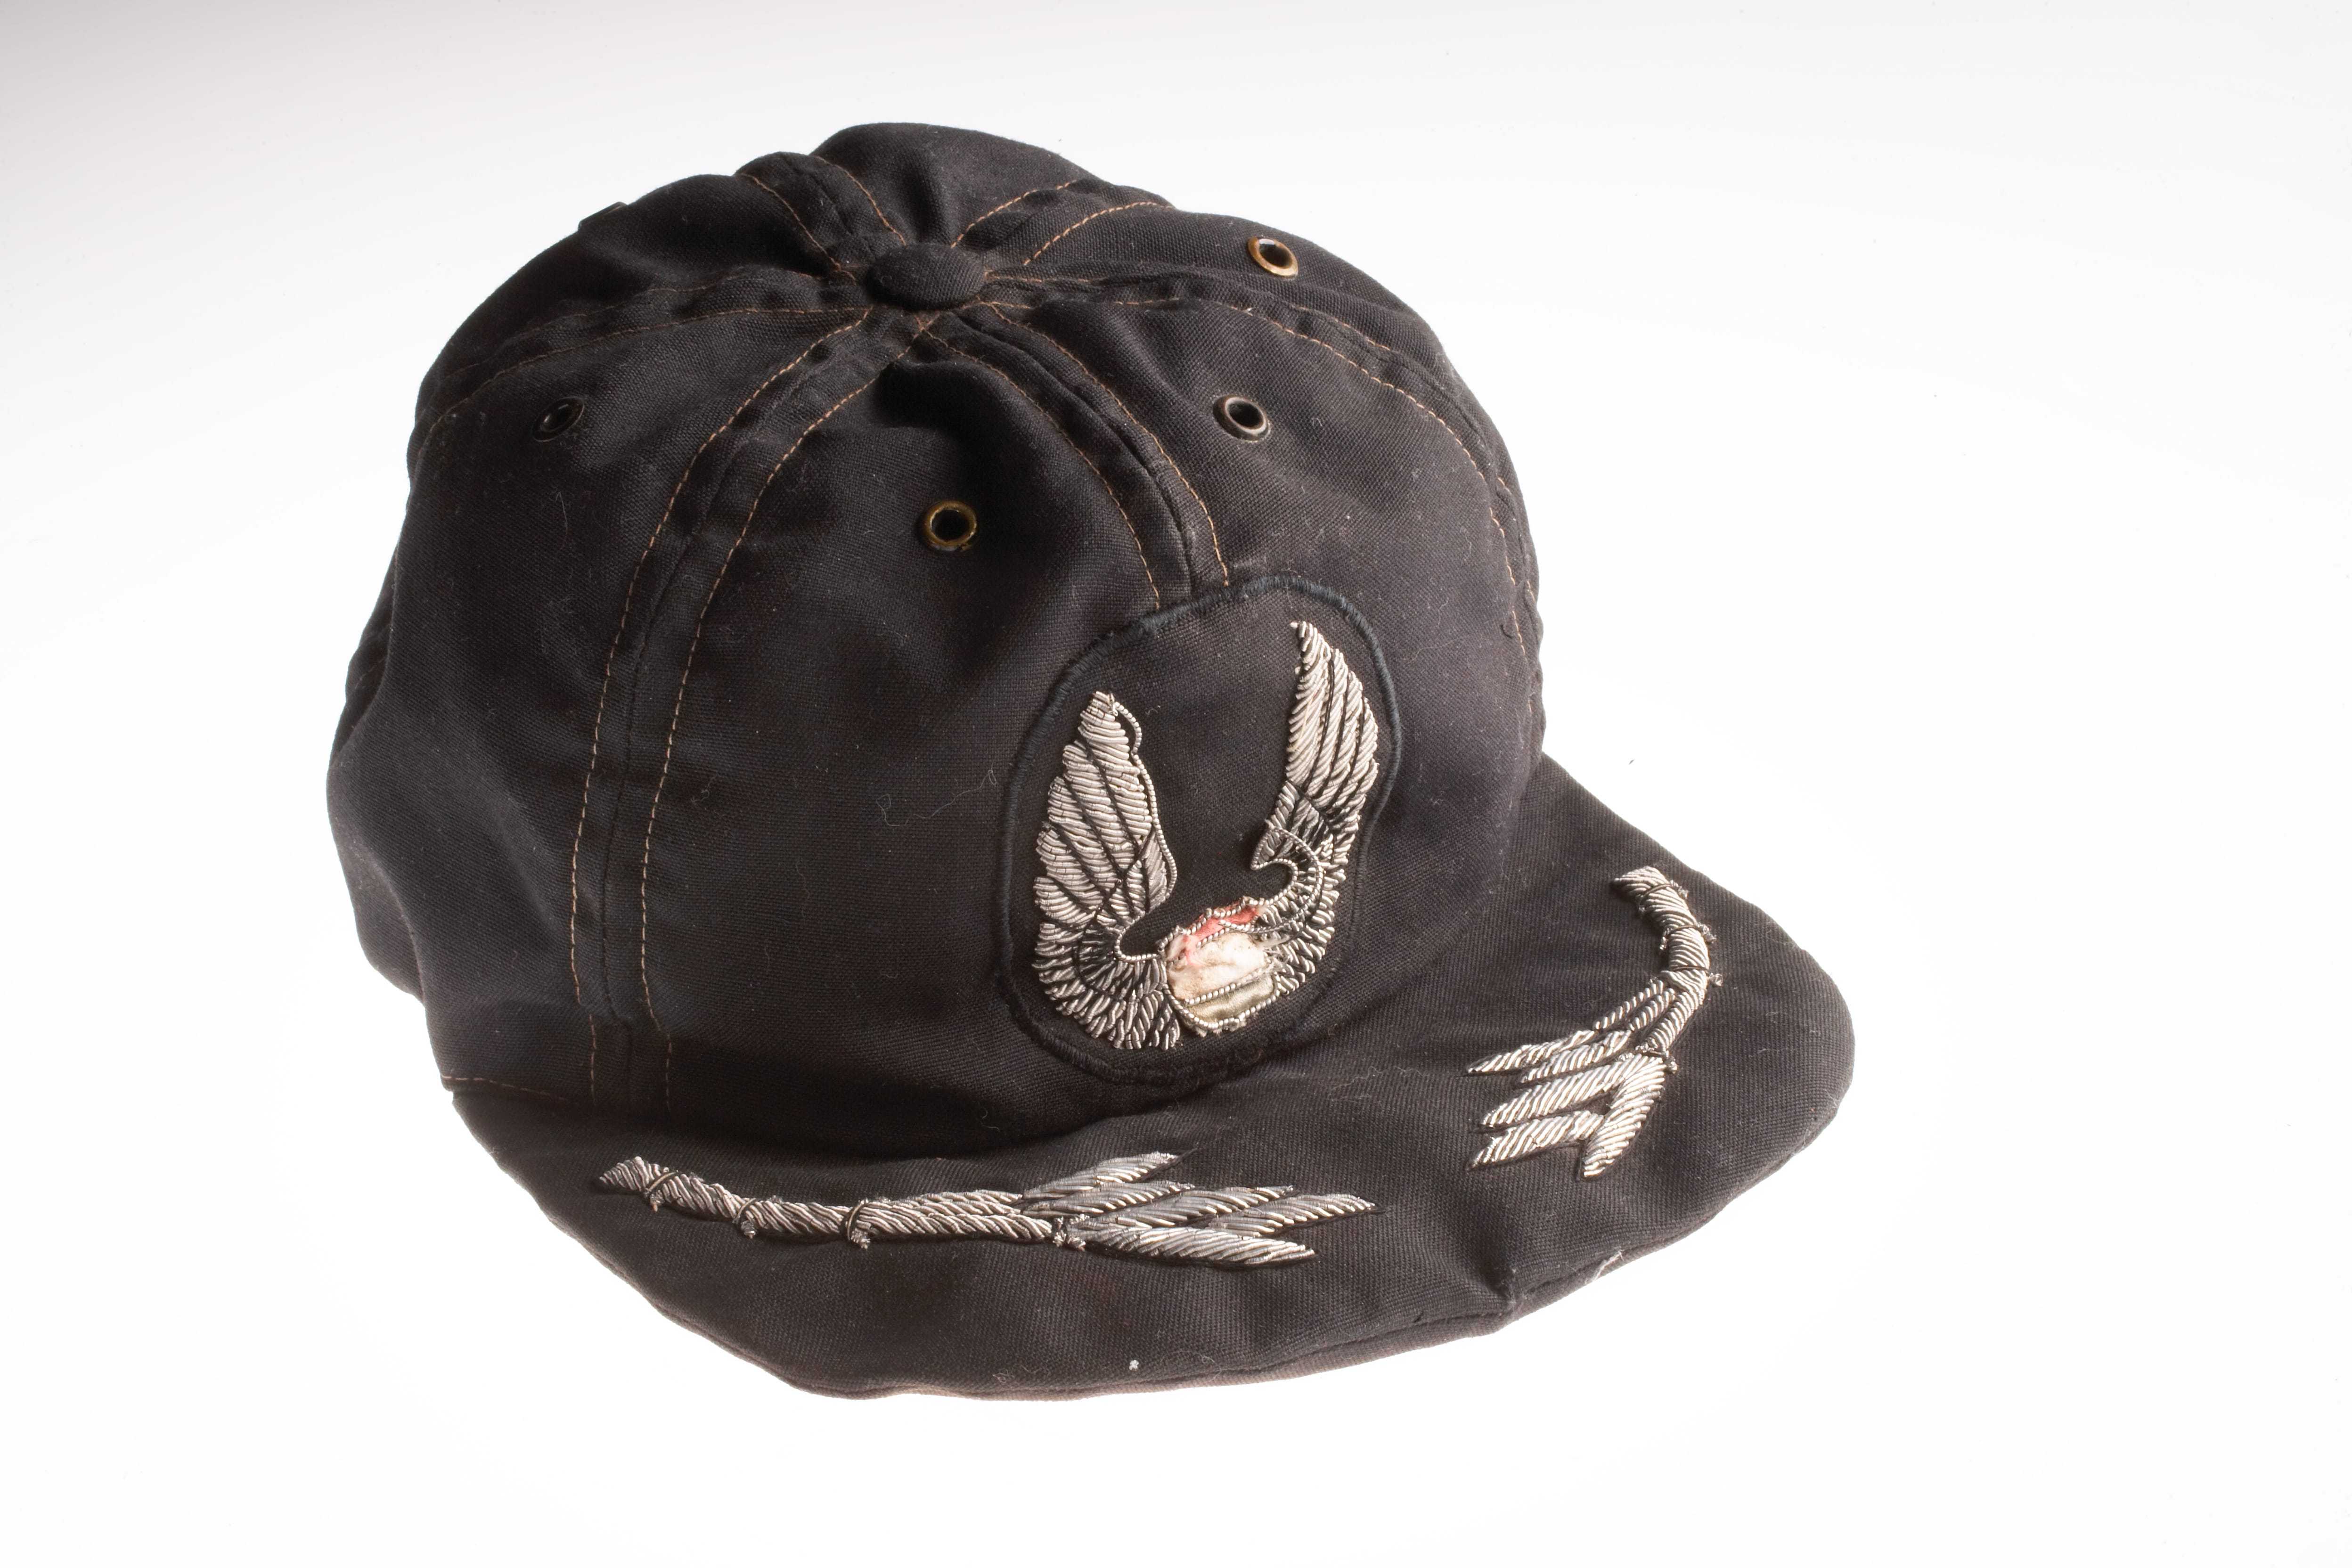 A worn black baseball cap with the Air America insignia embroidered on it